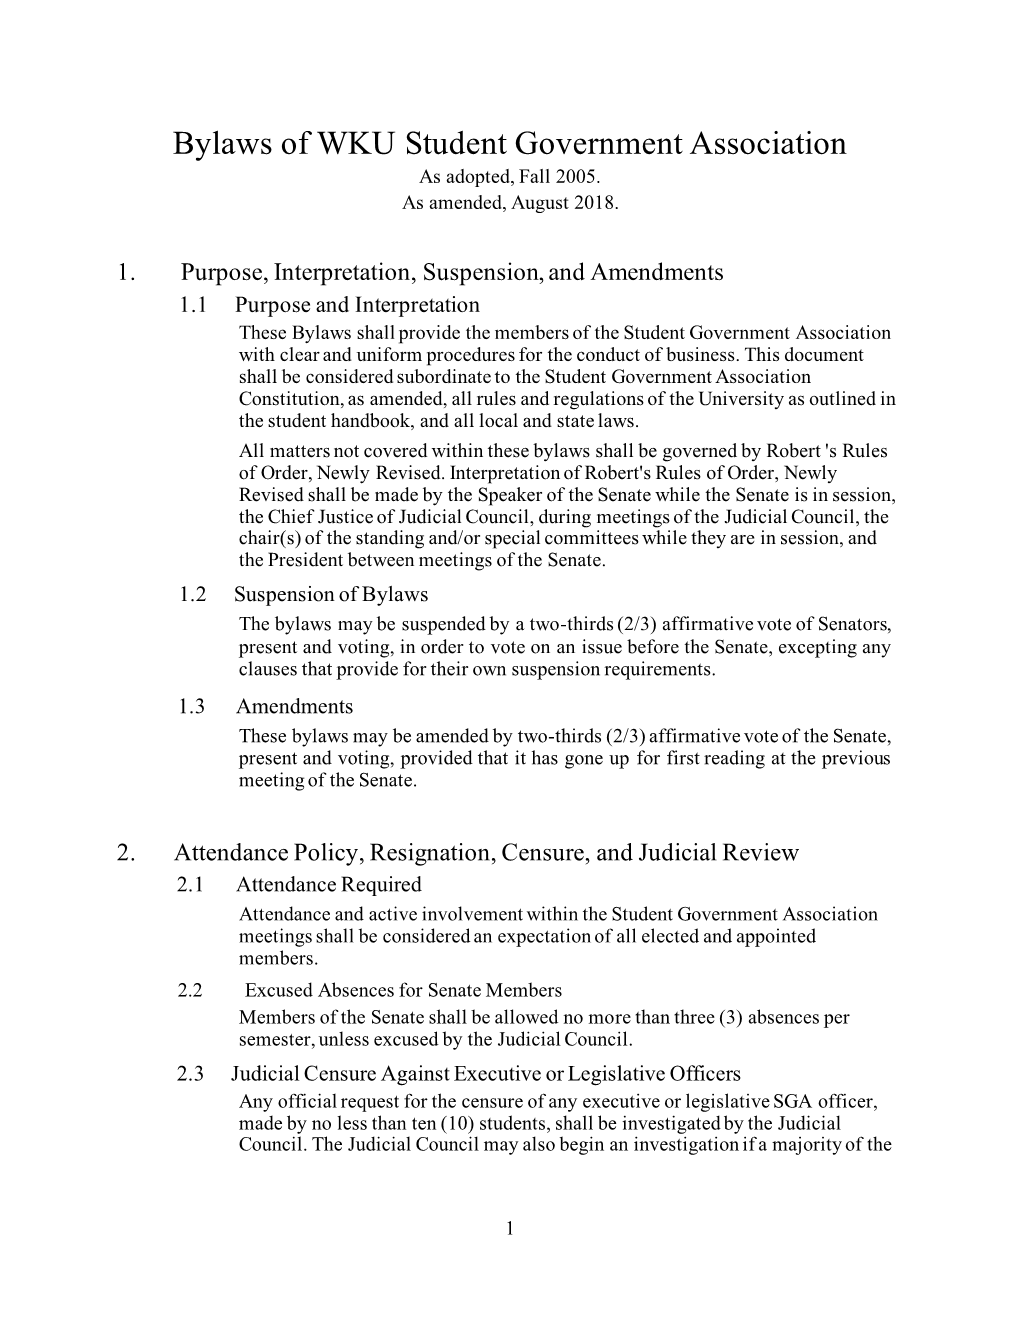 Bylaws of WKU Student Government Association As Adopted, Fall 2005